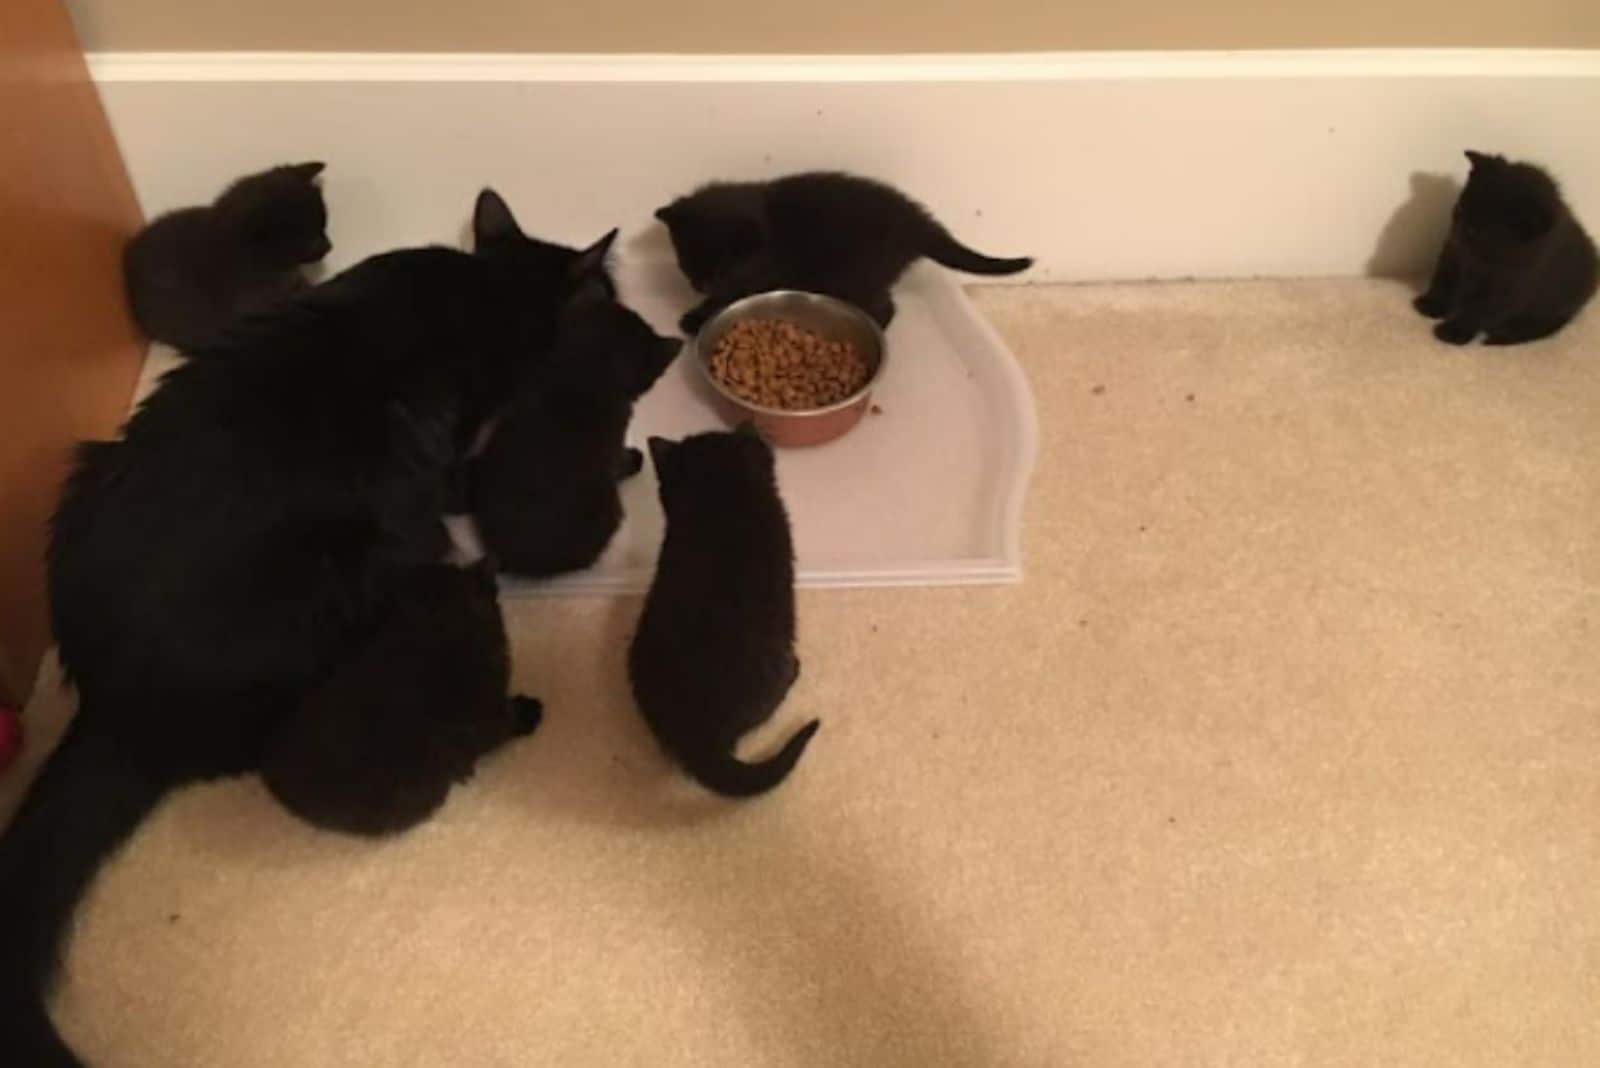 the kittens walk around the food with their mother